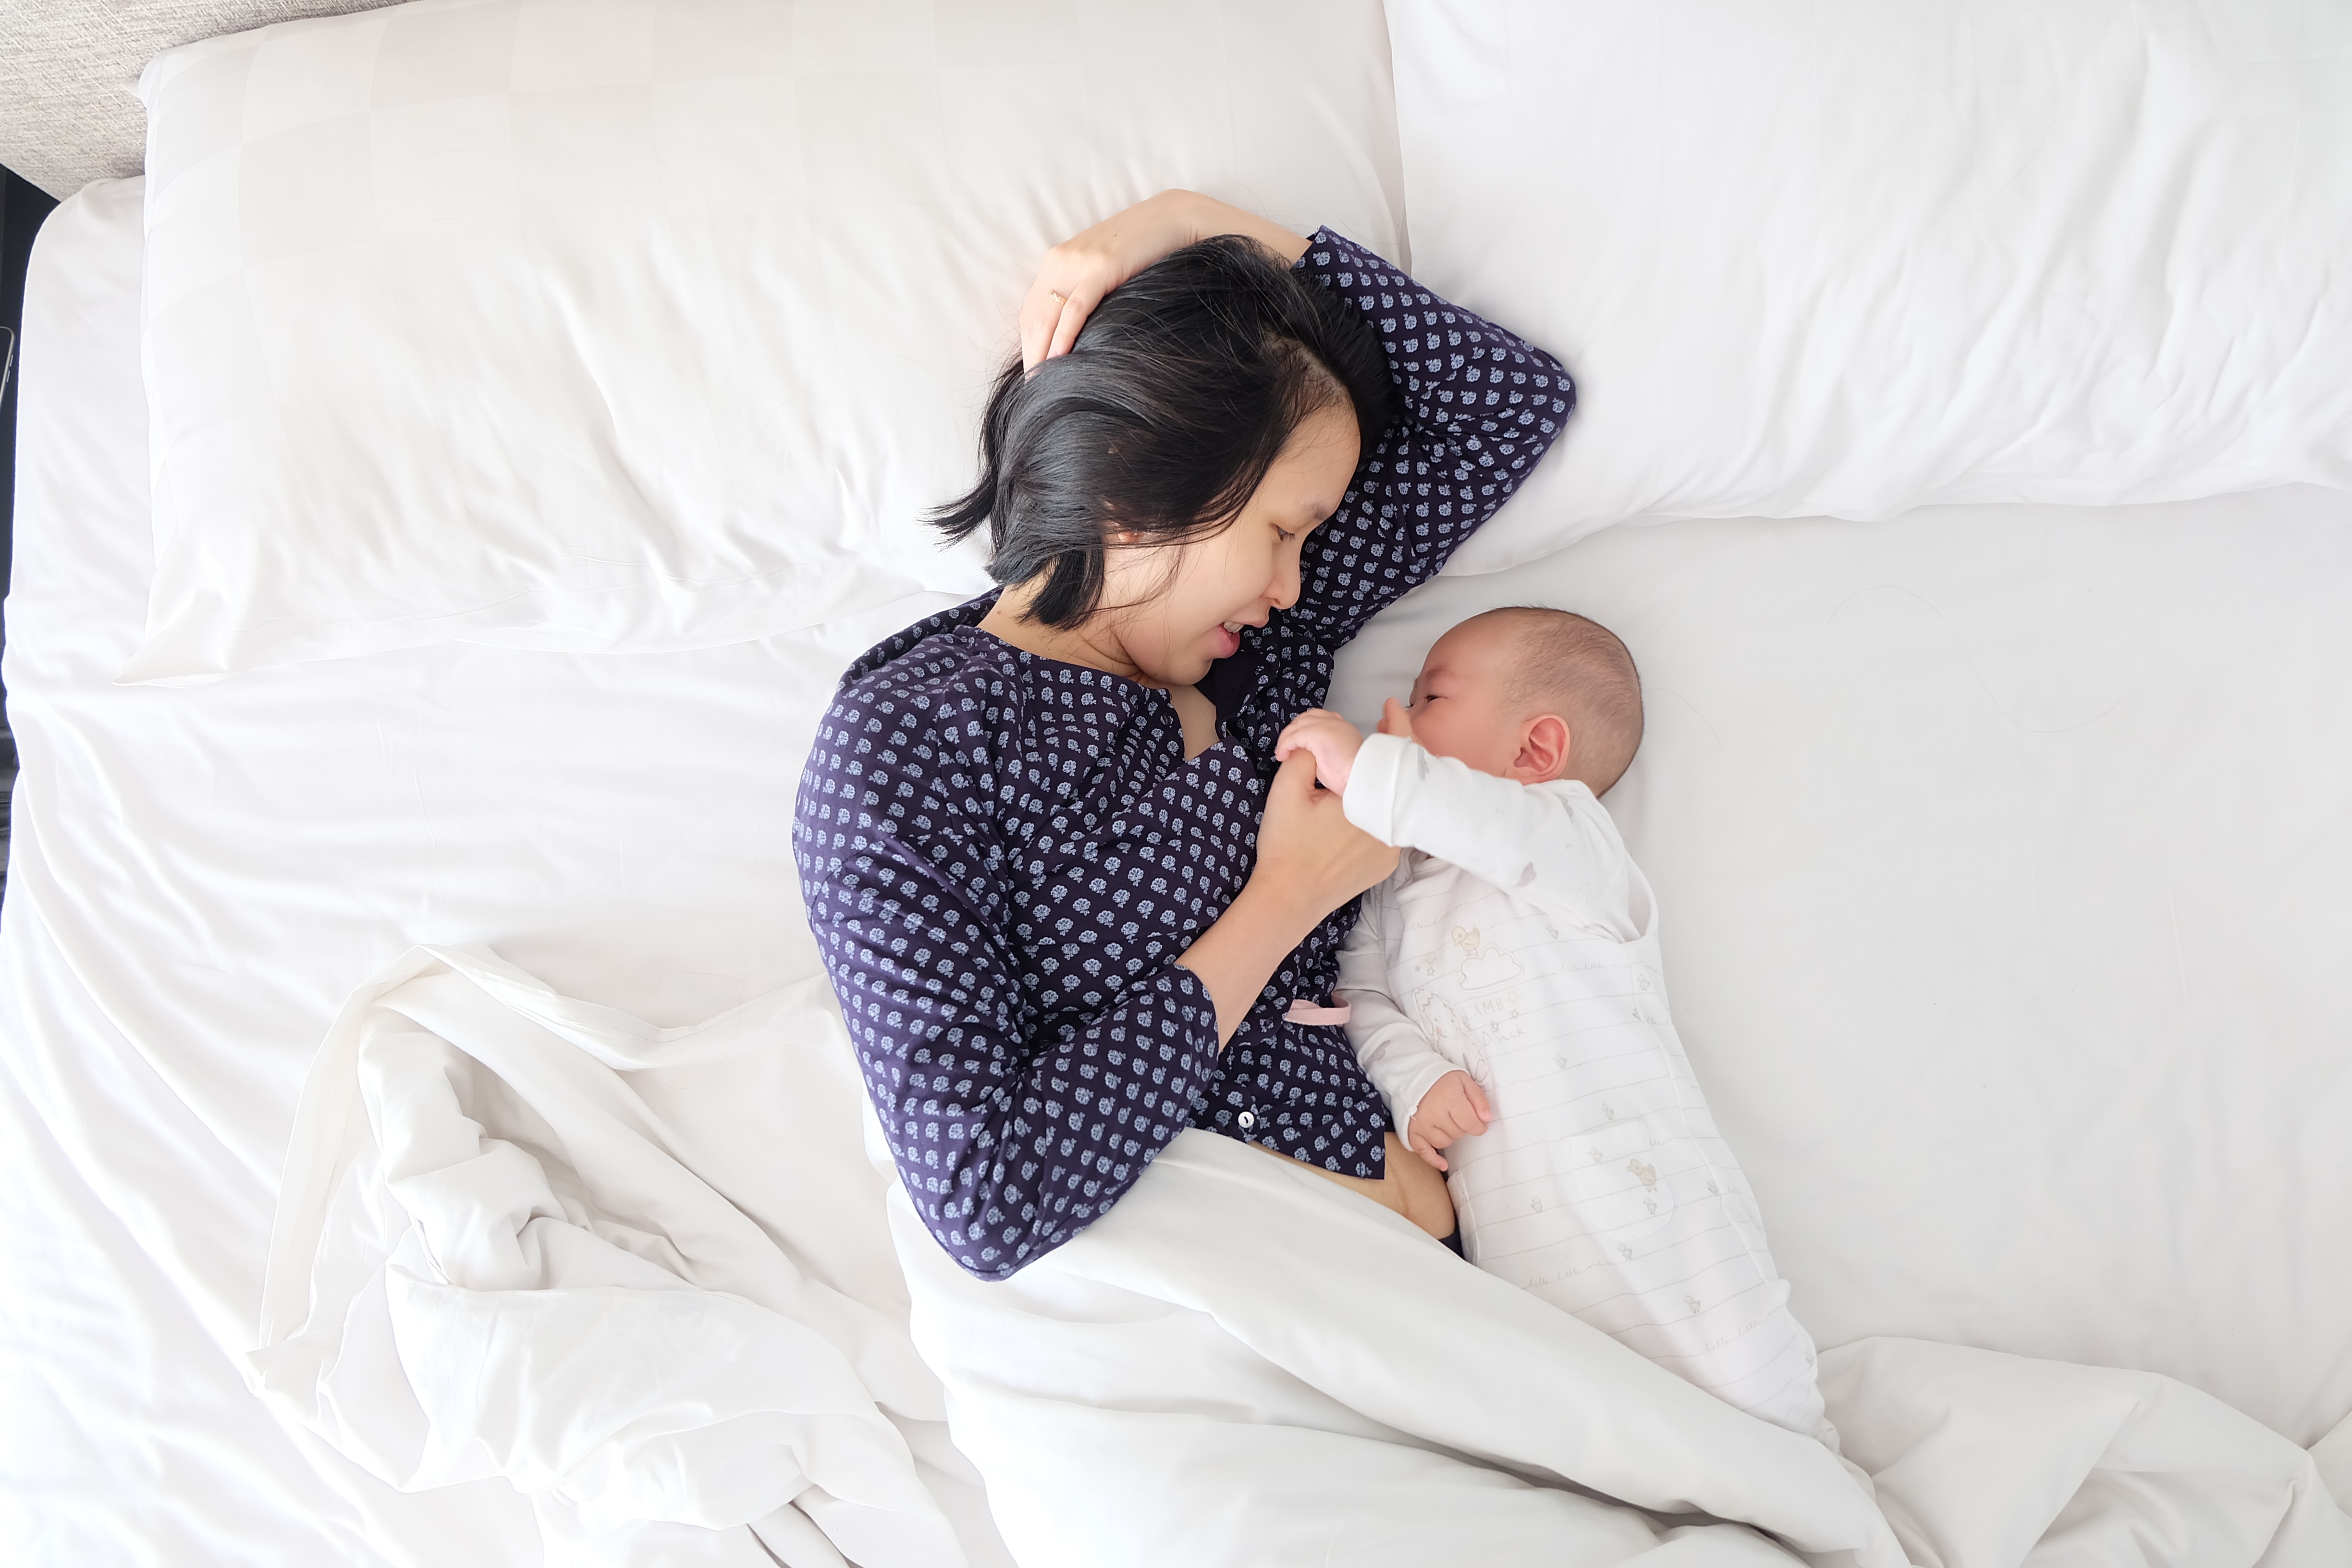 Benefits of breastfeeding for the mother